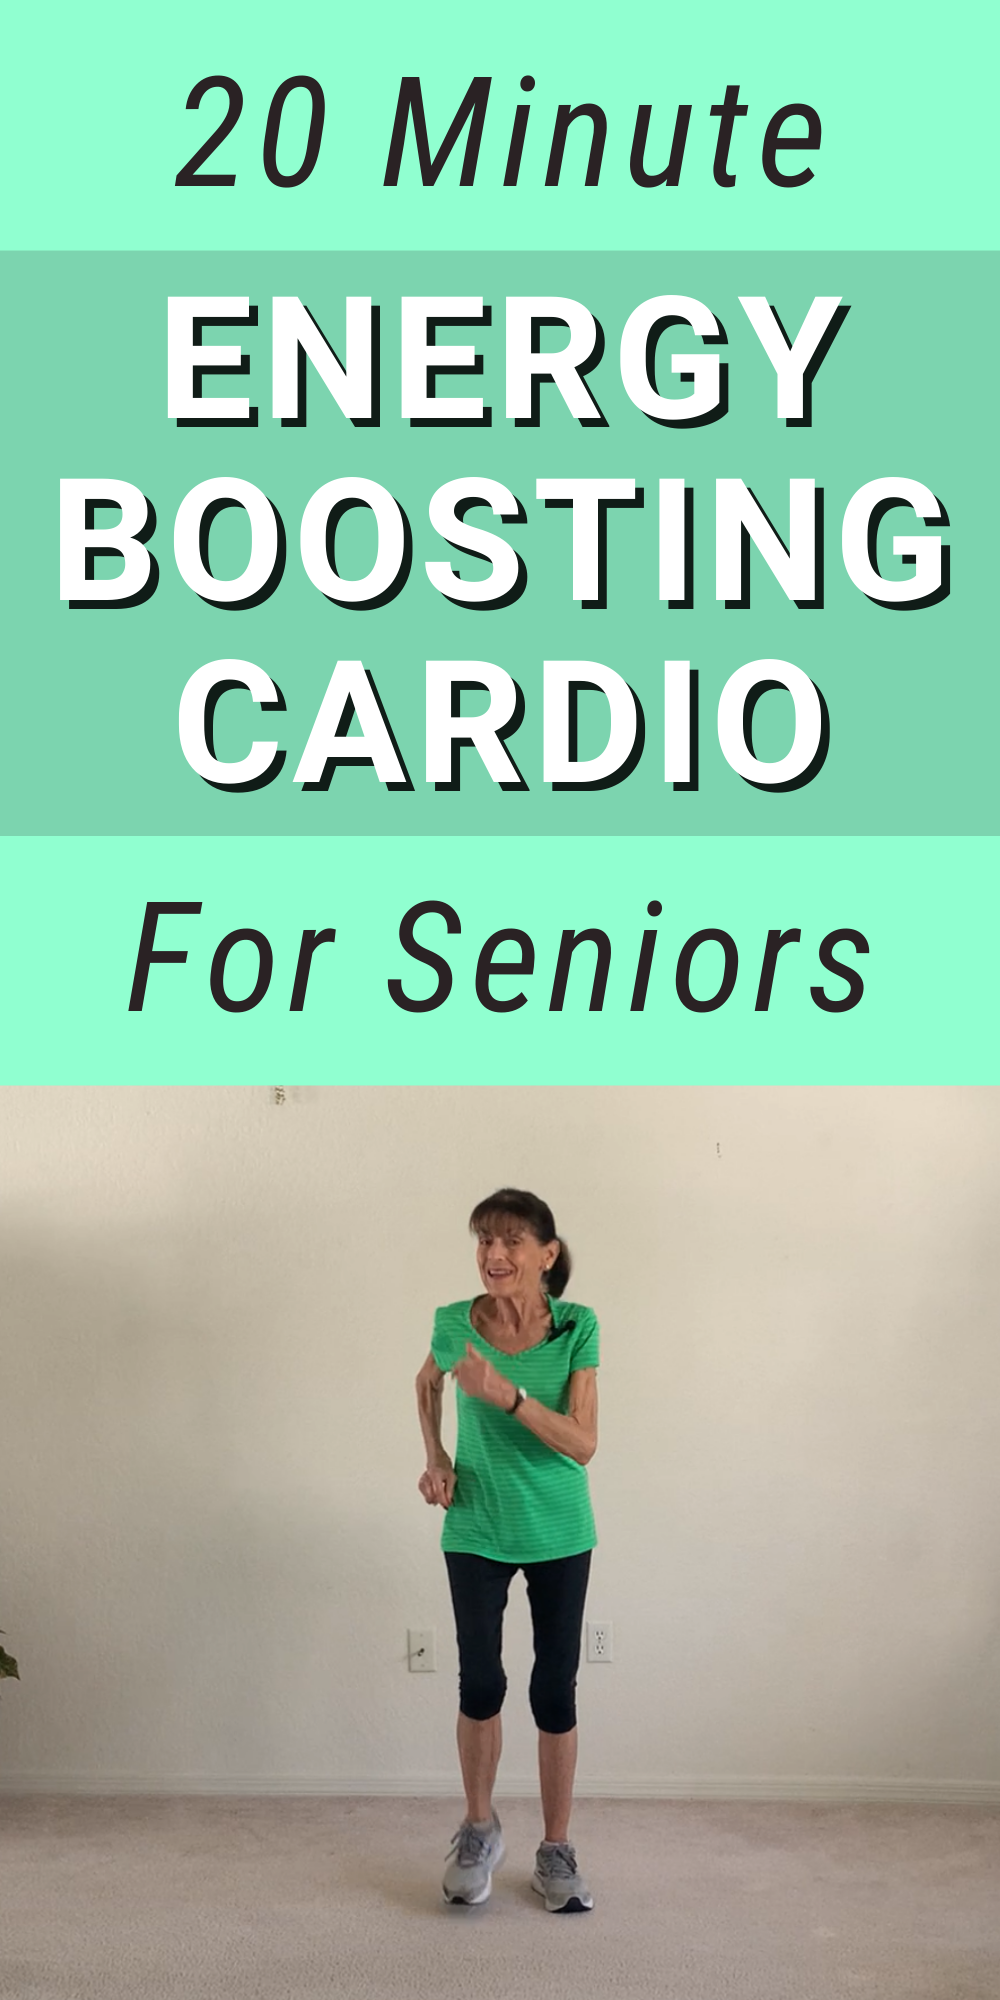 Cardio for seniors 20 minute workout